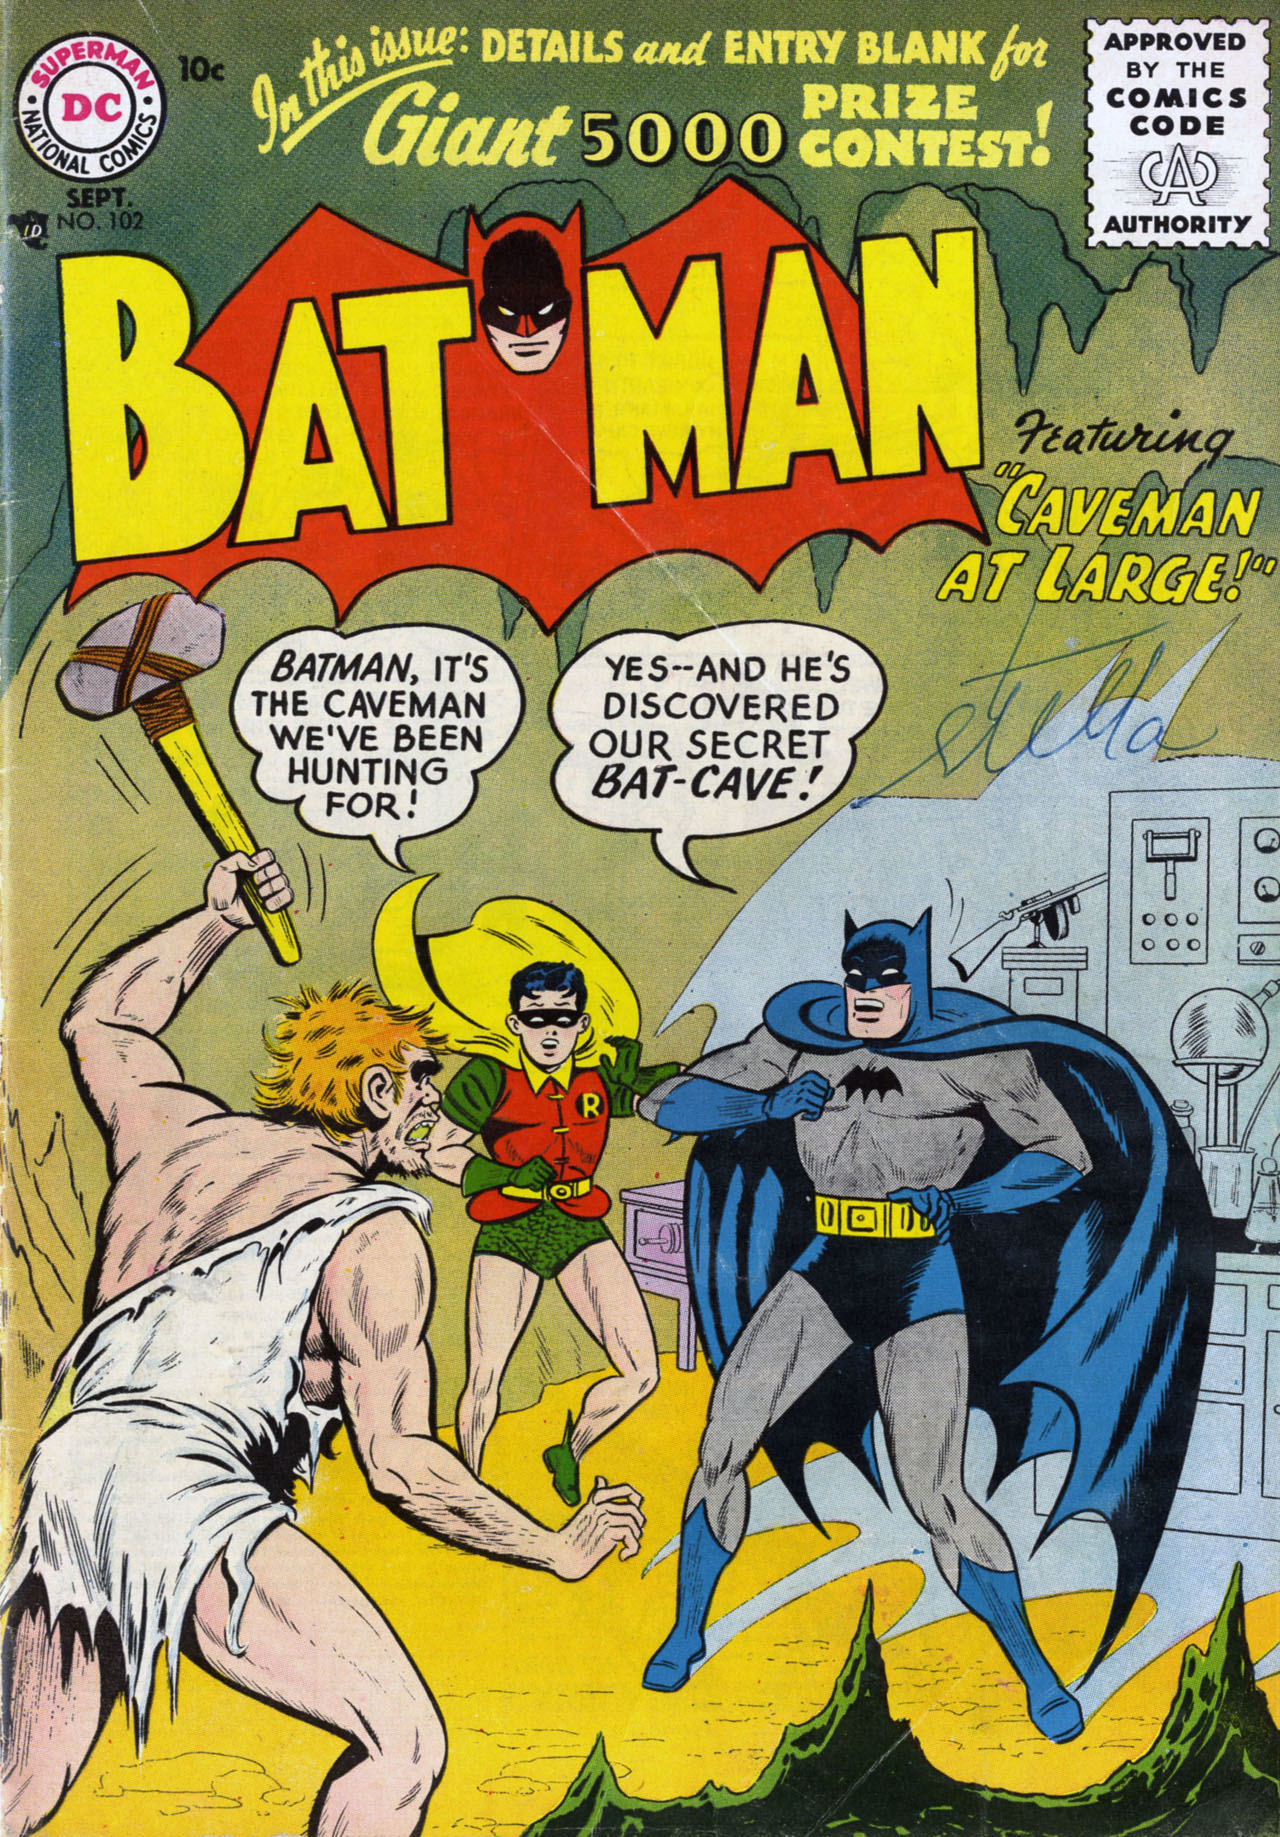 Batman 1940 Issue 102 | Read Batman 1940 Issue 102 comic online in high  quality. Read Full Comic online for free - Read comics online in high  quality .| READ COMIC ONLINE